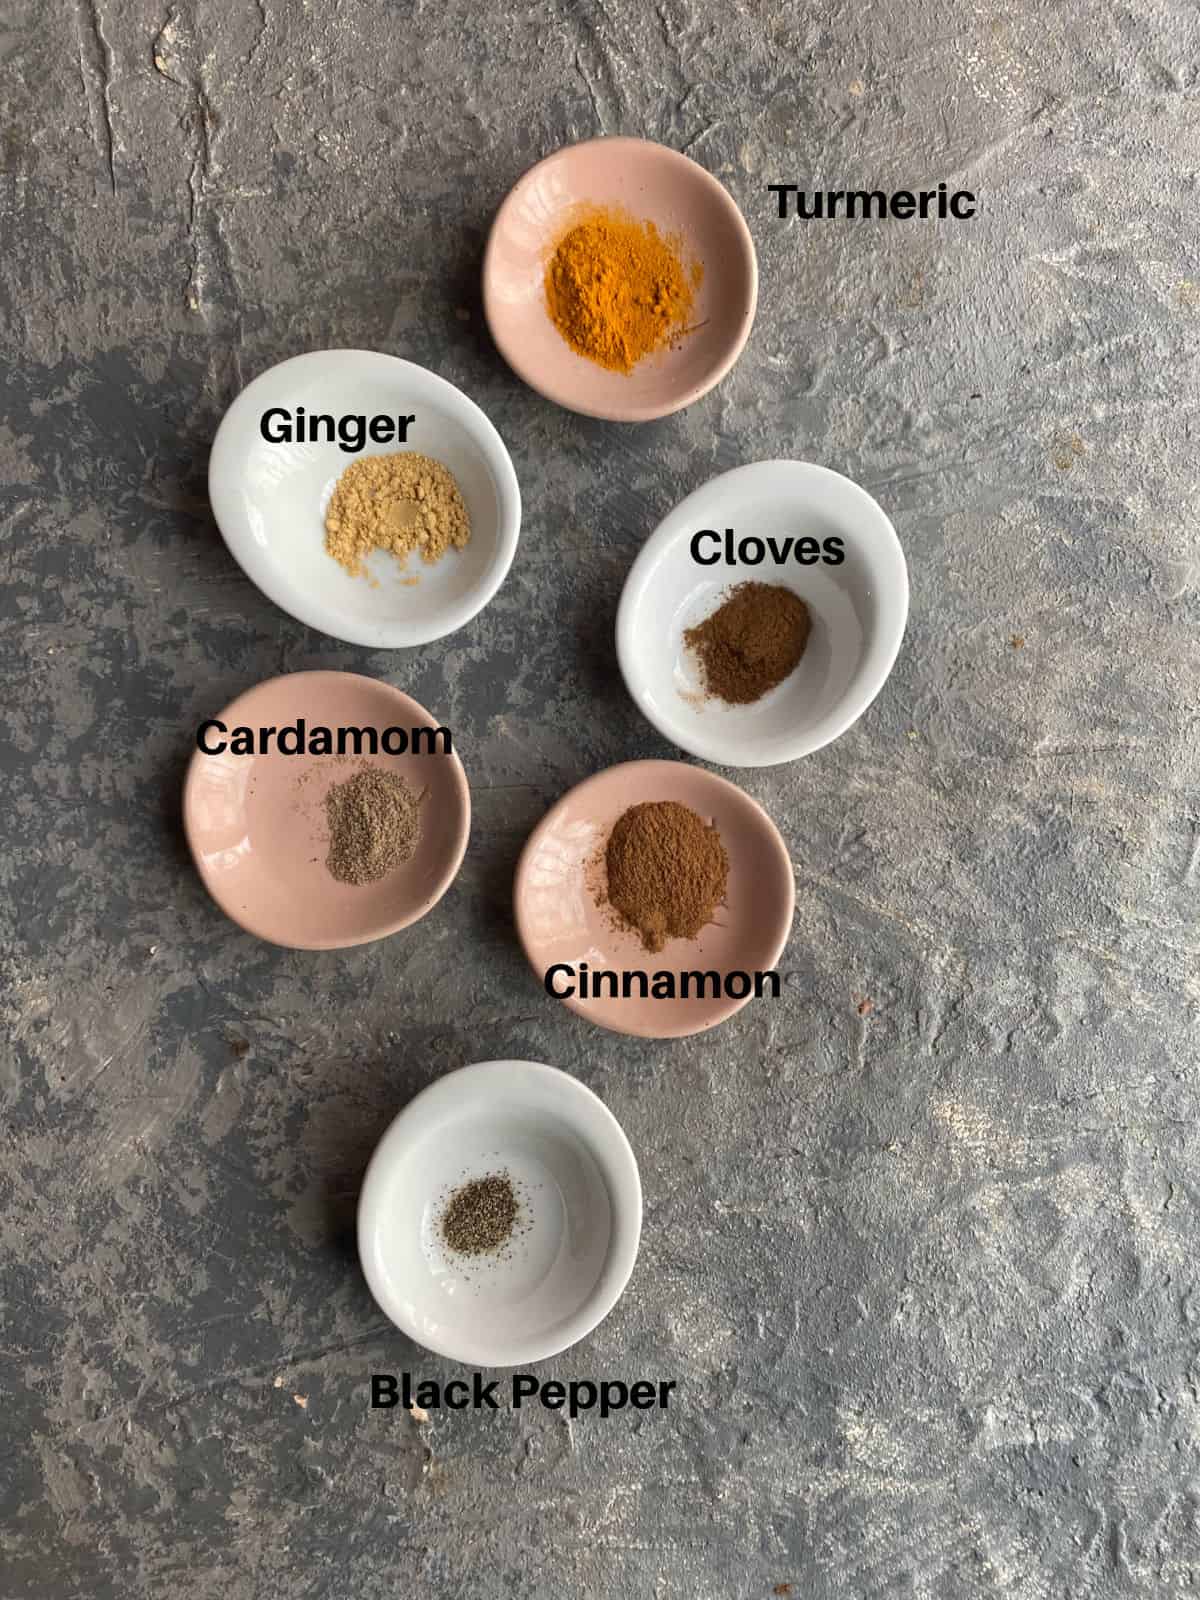 Spices to make golden milk in separate small bowls. Tuemric, cinnamon, ginger, cloves, cardamom and black pepper